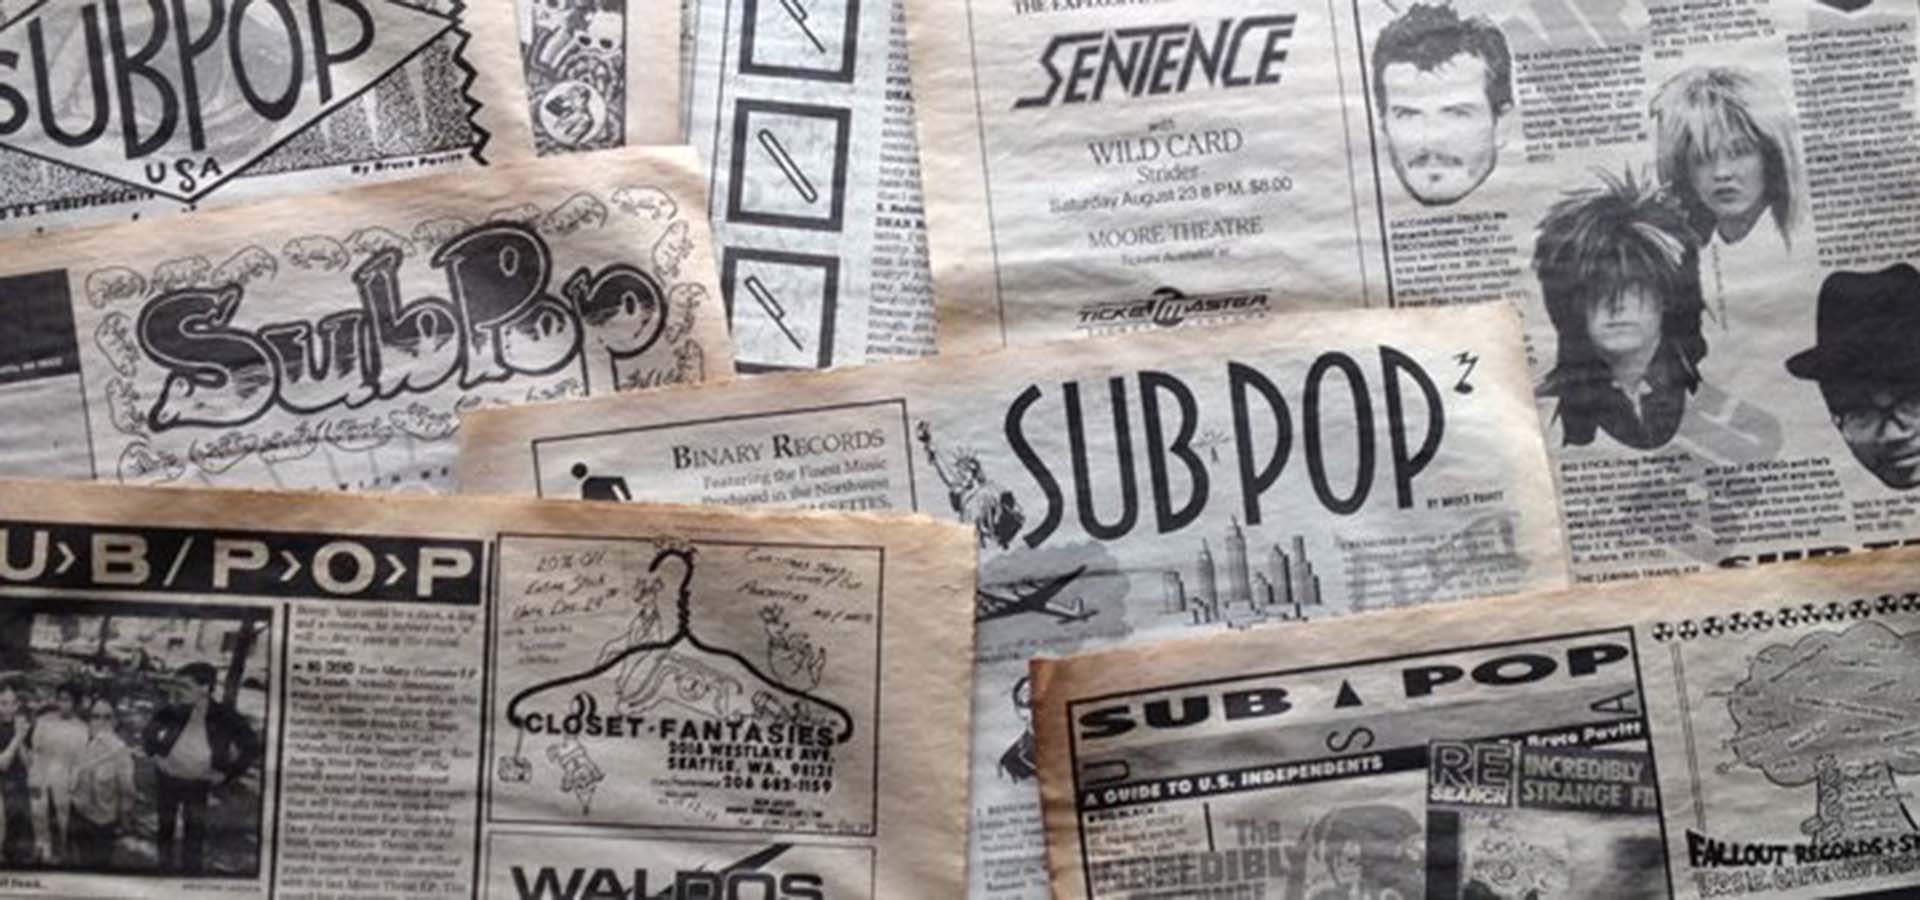 Newspaper pages with the SubPop logo and stories